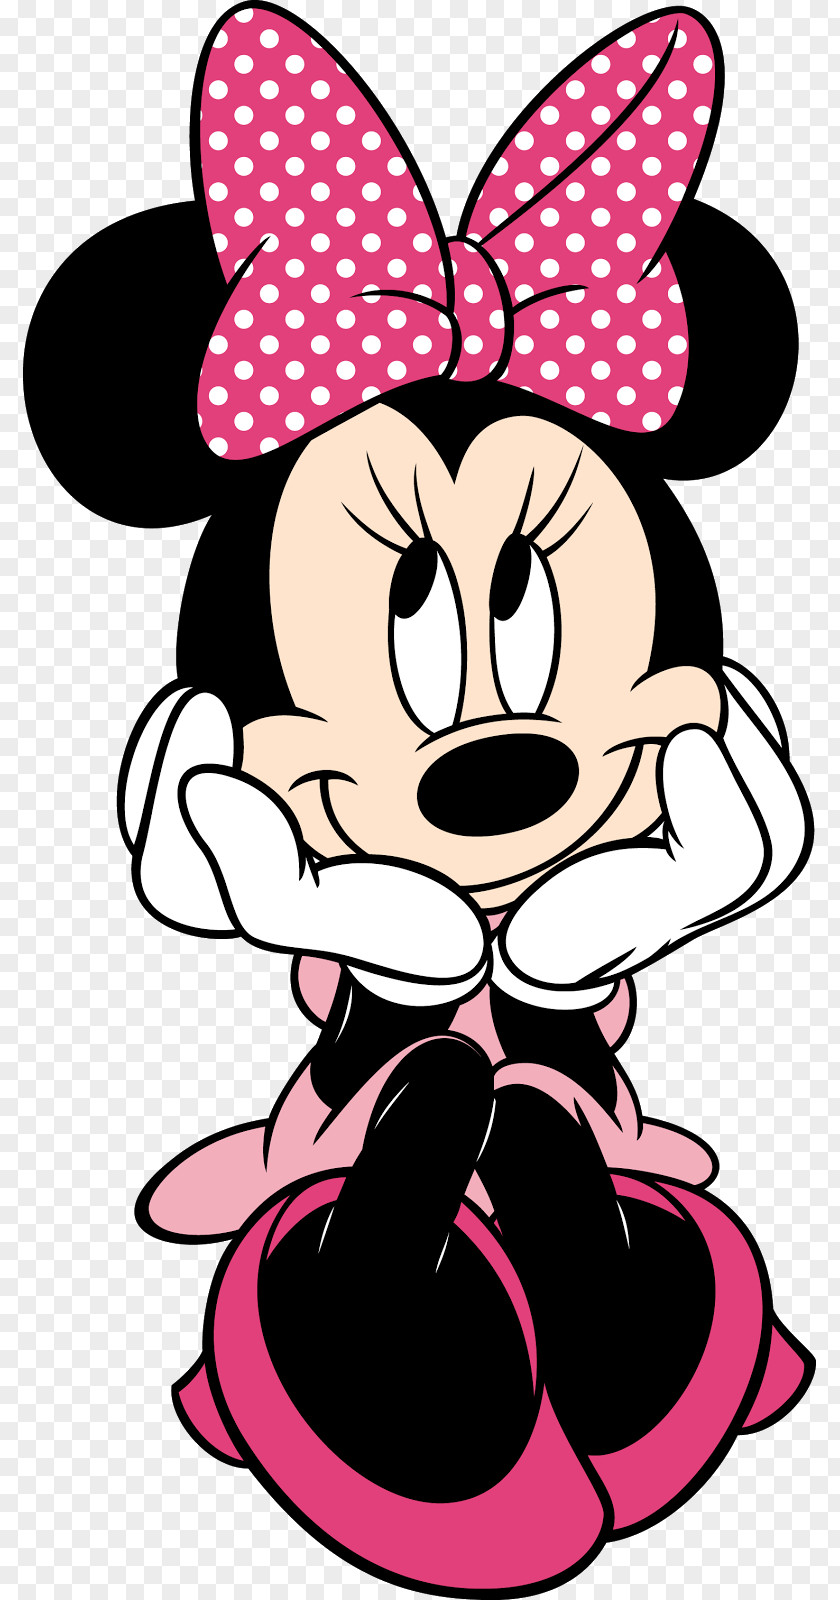 Mickey Mouse Minnie Daisy Duck Clip Art PNG